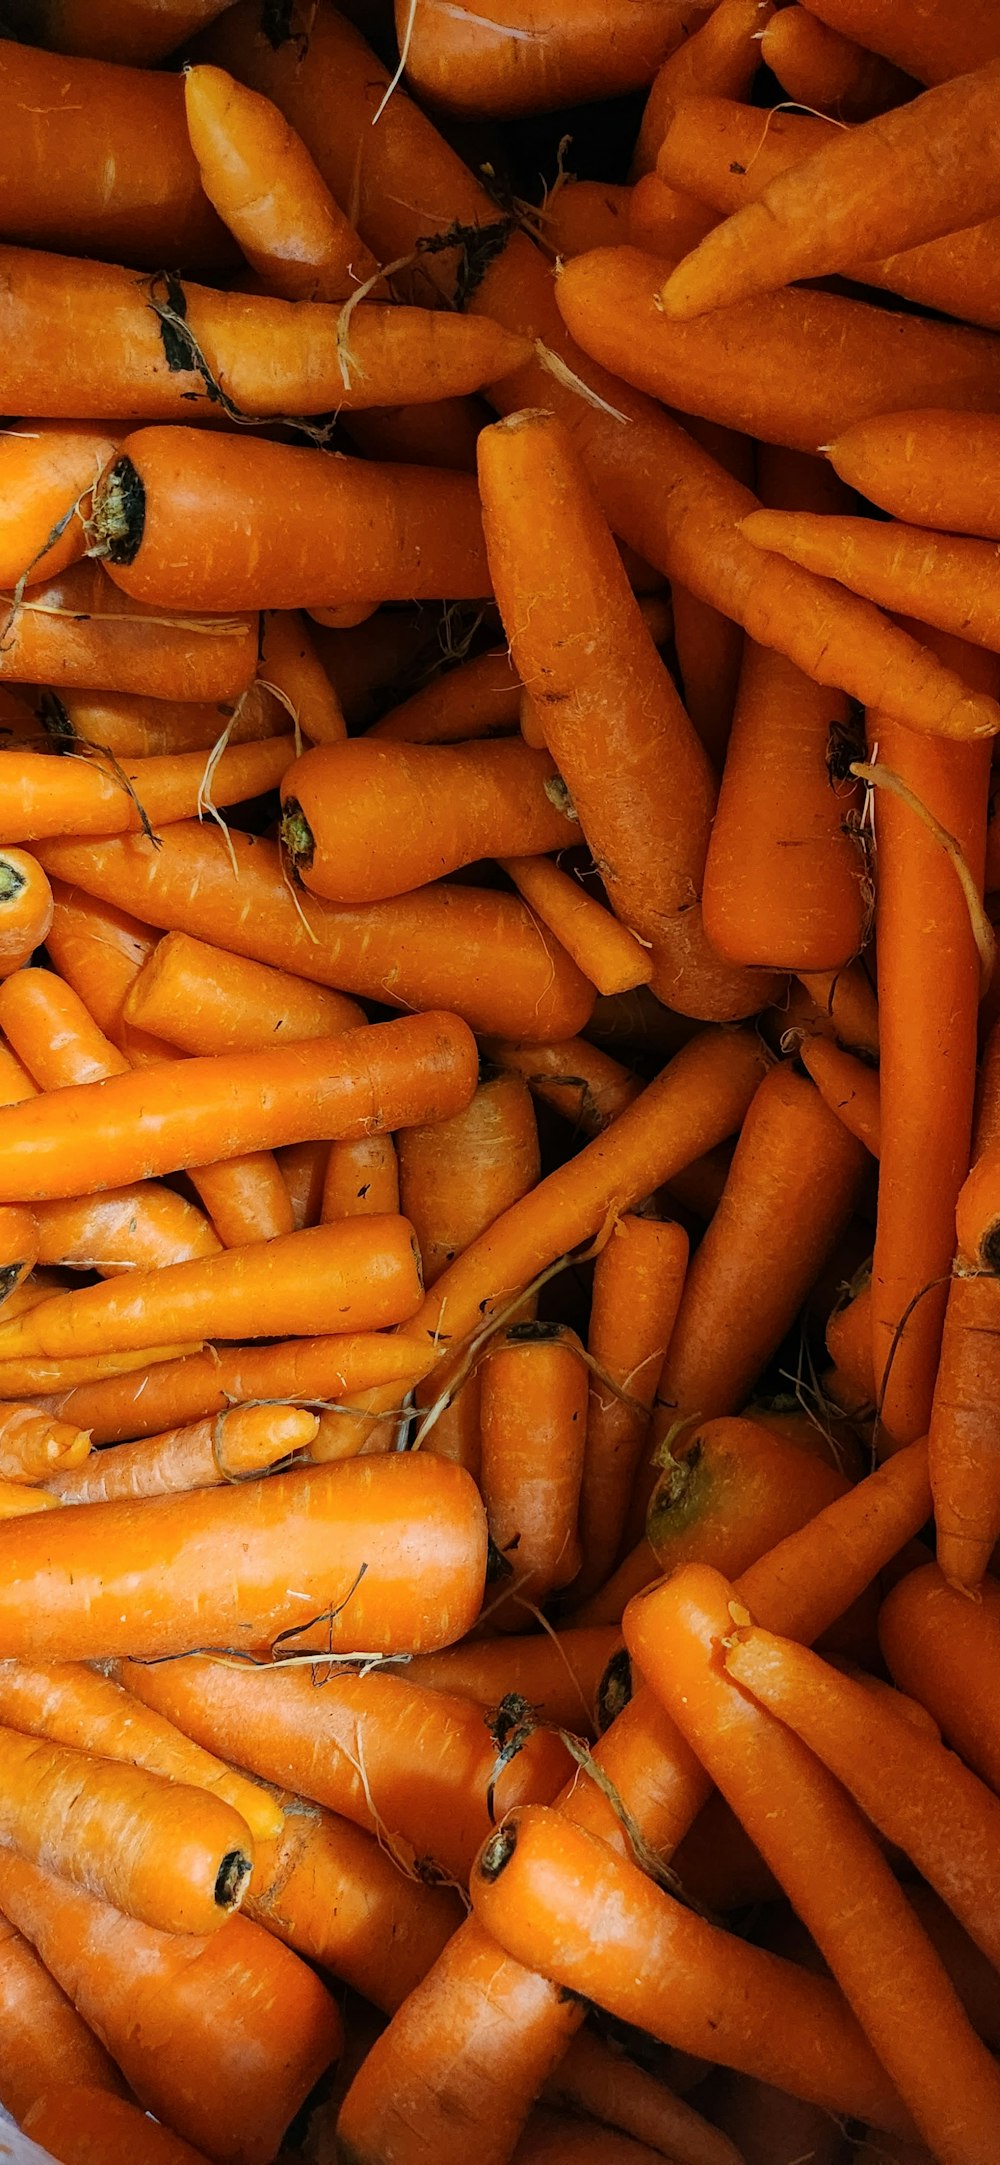 a bunch of carrots are piled up together